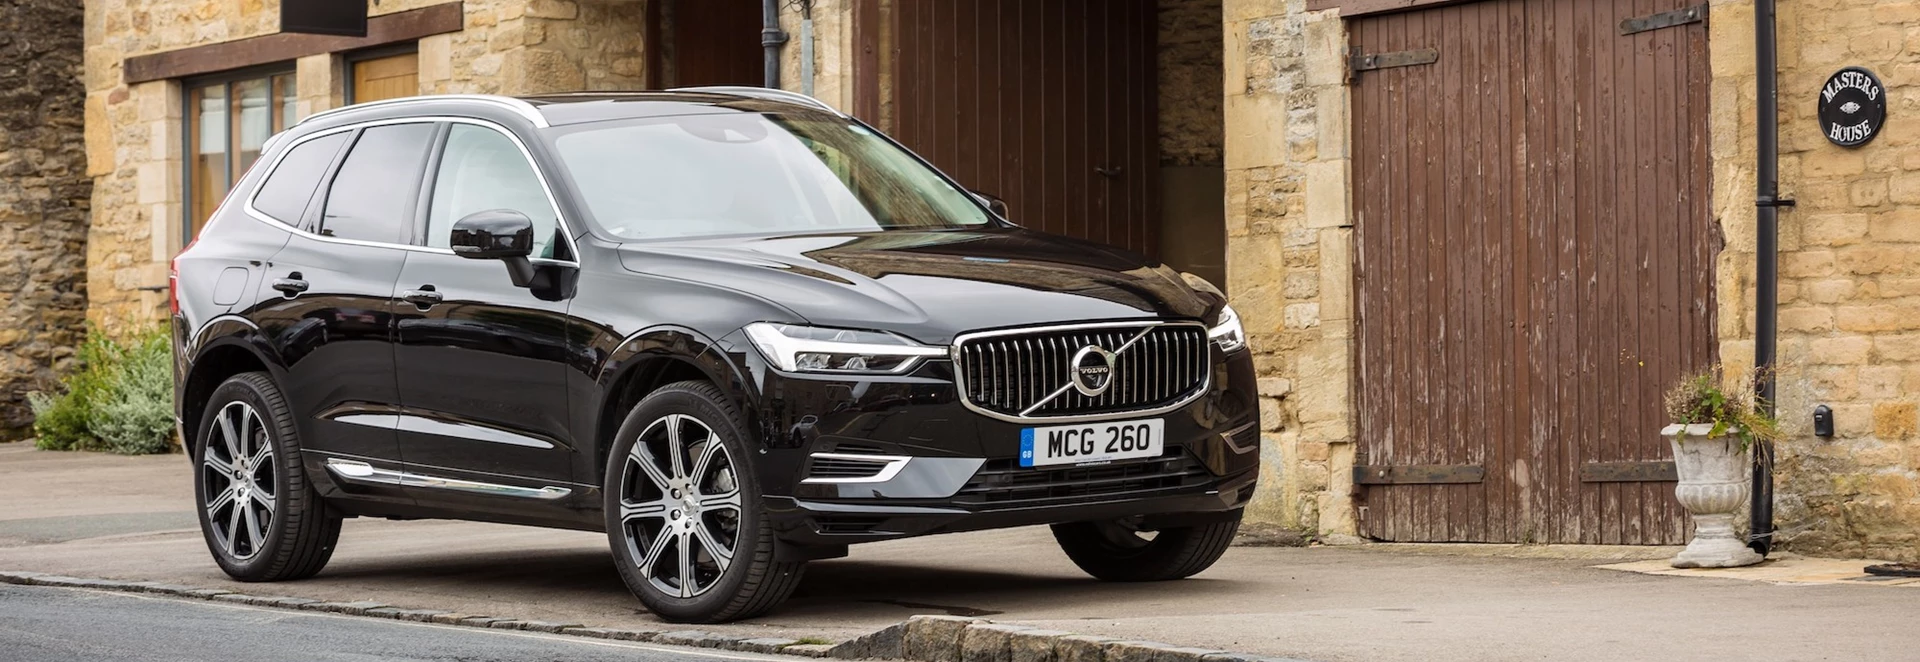 2019 Volvo XC60 T8 Twin-Engine review